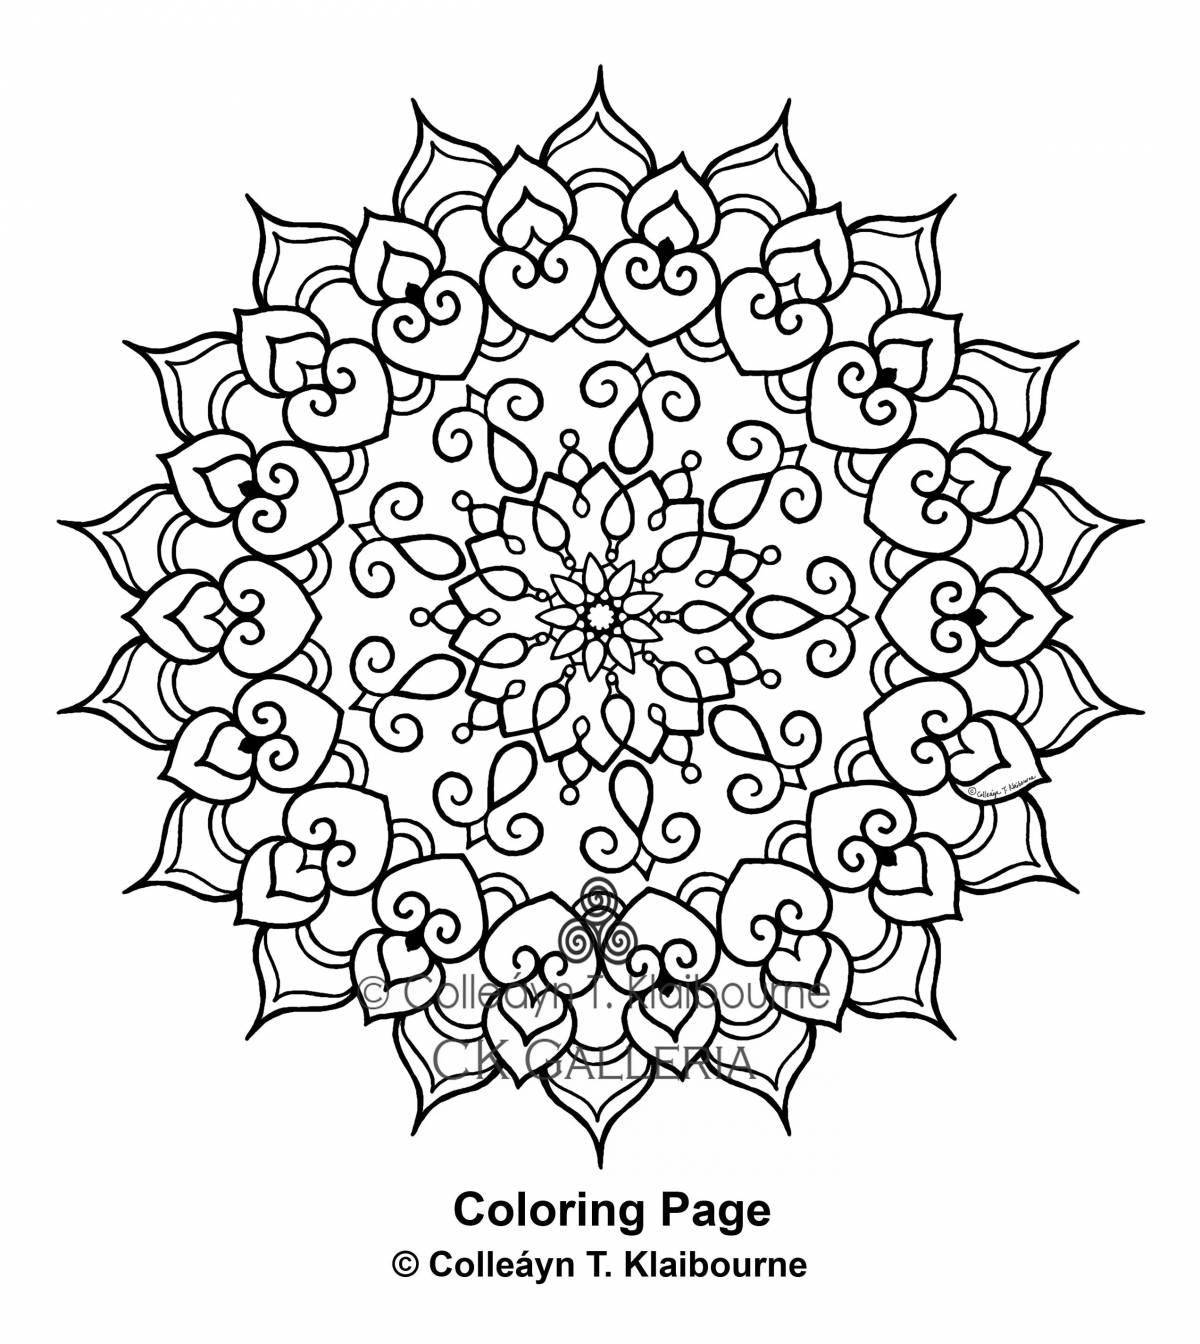 Compassionate coloring mandala for relationships